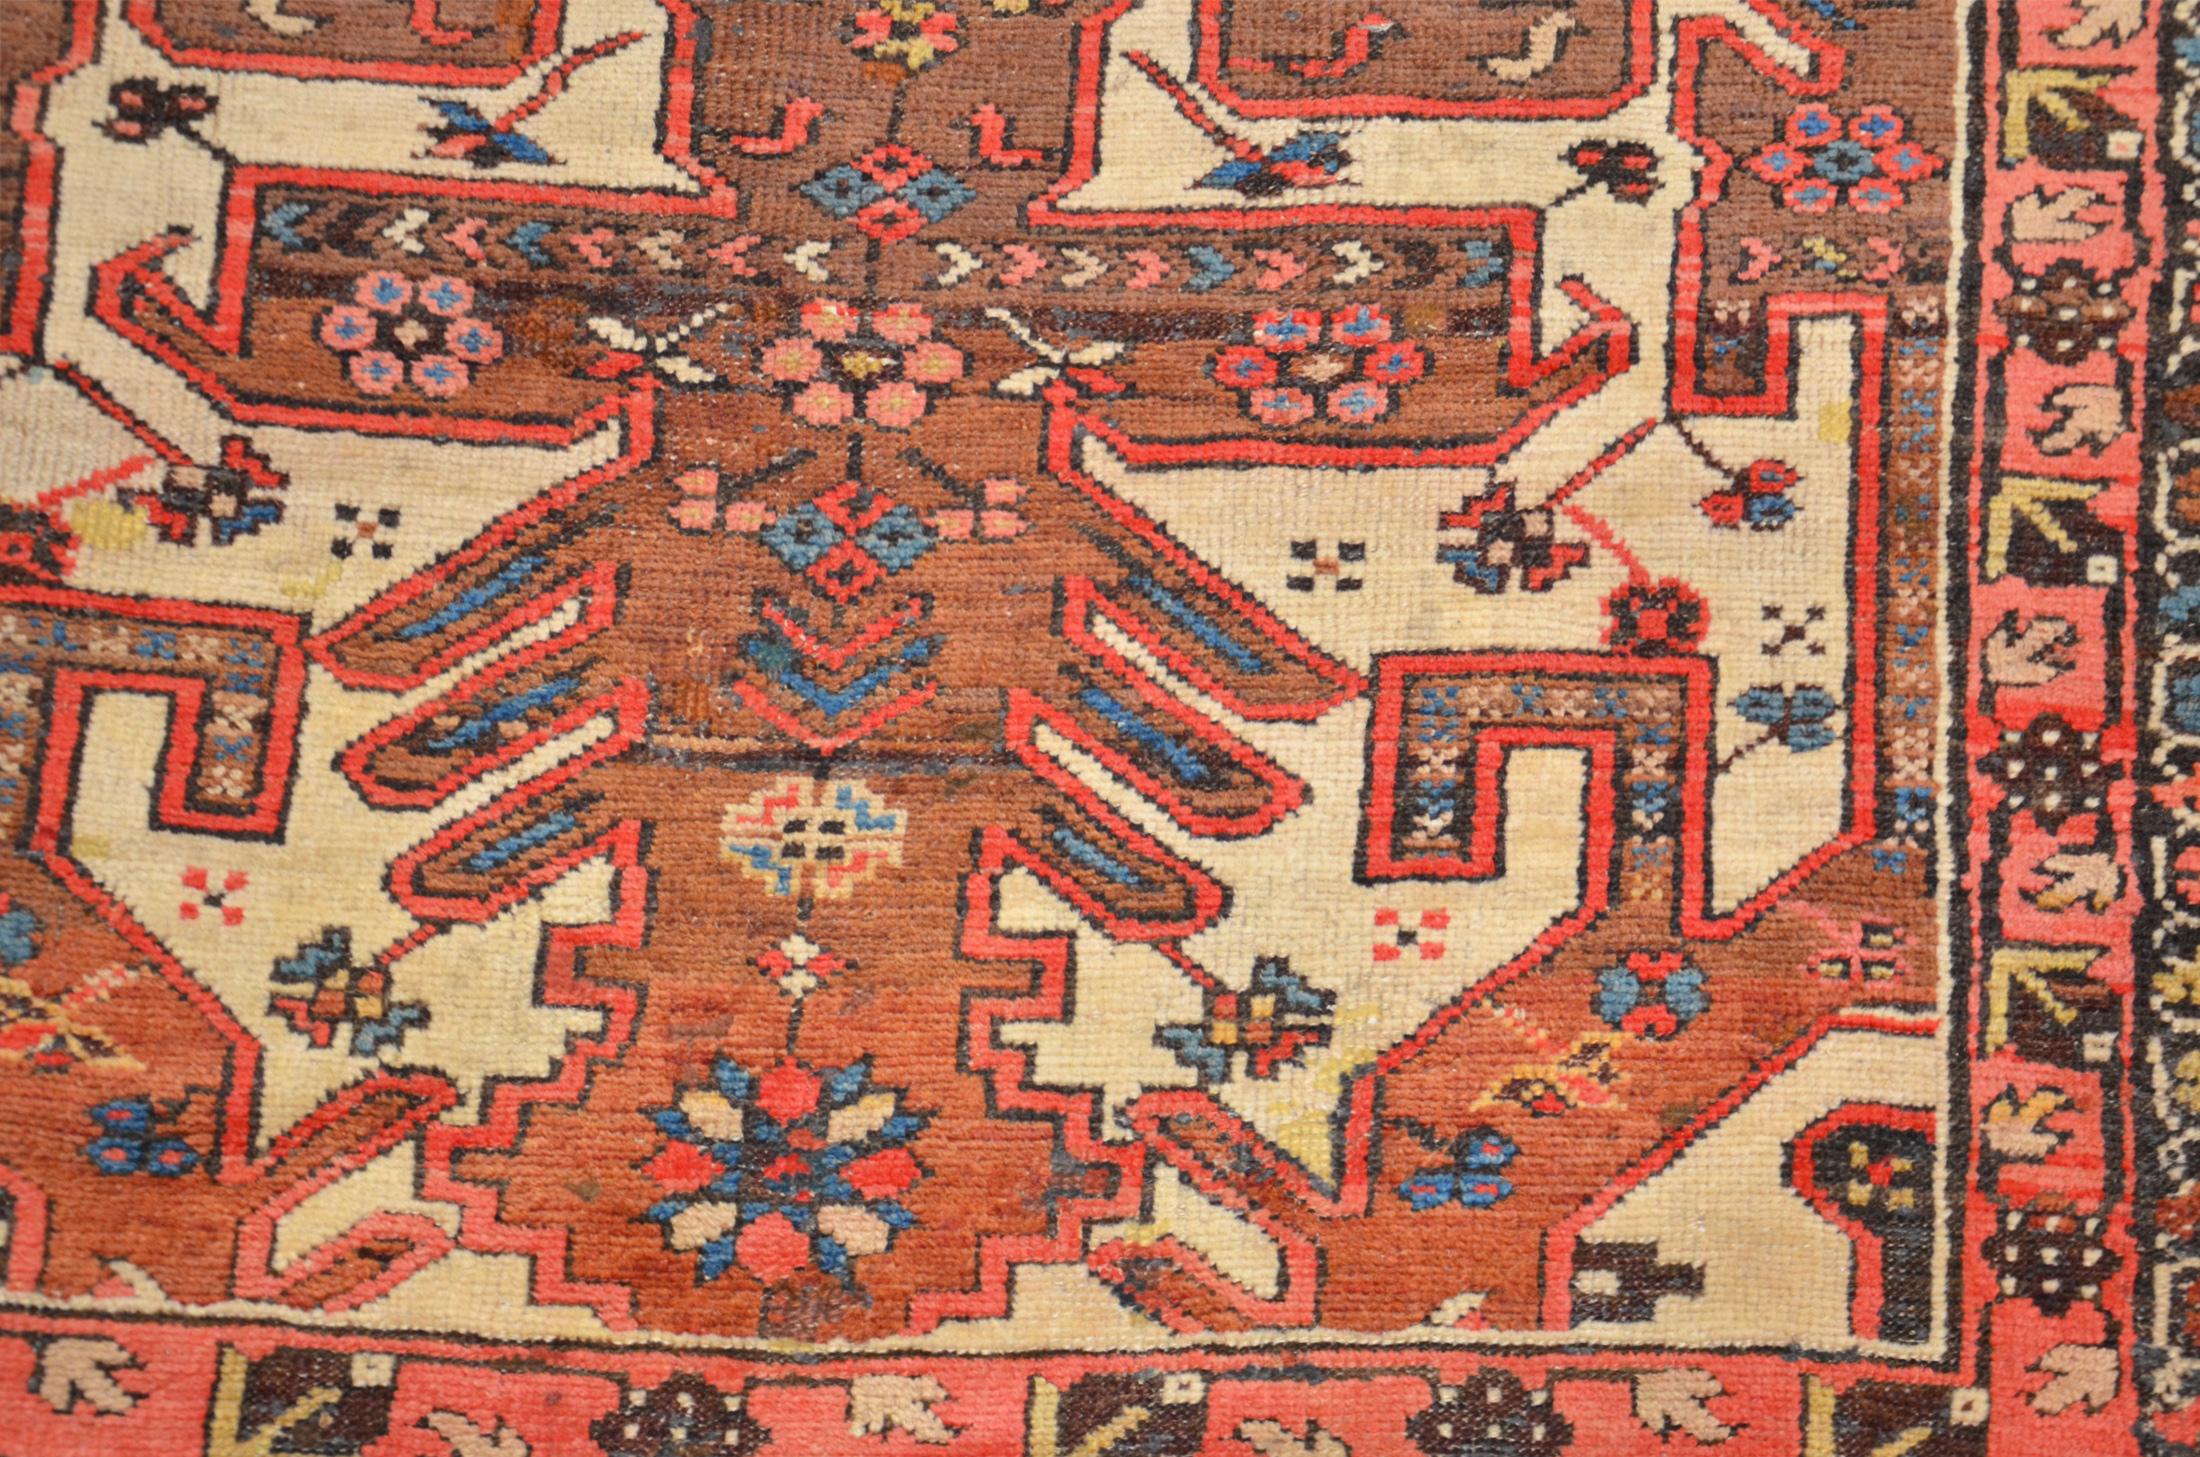 Ancient rug from the Caucasus region
- Made in three shades: beige, earth and orange.
- Highlight the geometric design and harmony of its composition.
- Stars, geometric flowers and arrows appear in the composition
- Excellent conservation